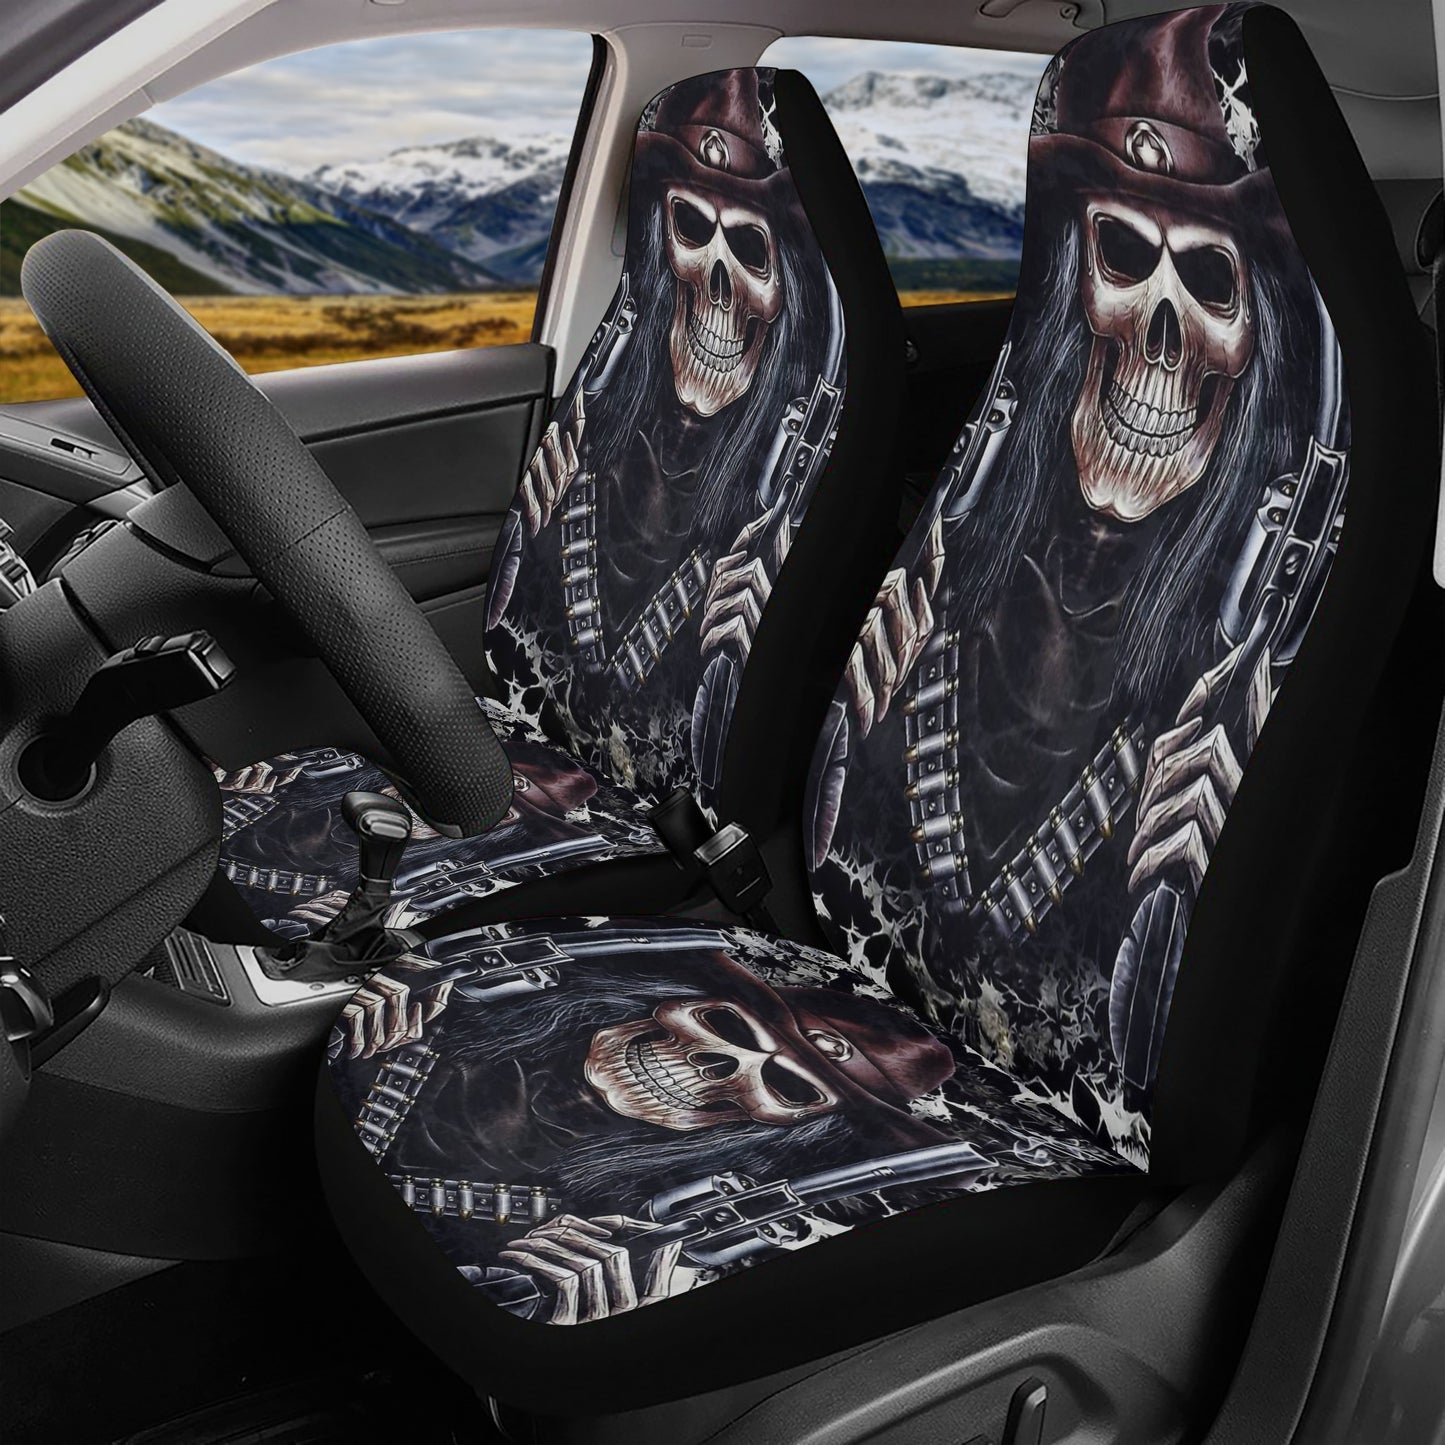 Flower skull car seat protector, floral skull seat cover for car, grim reaper seat cover for truck, skull car seat cover full set, goth floo